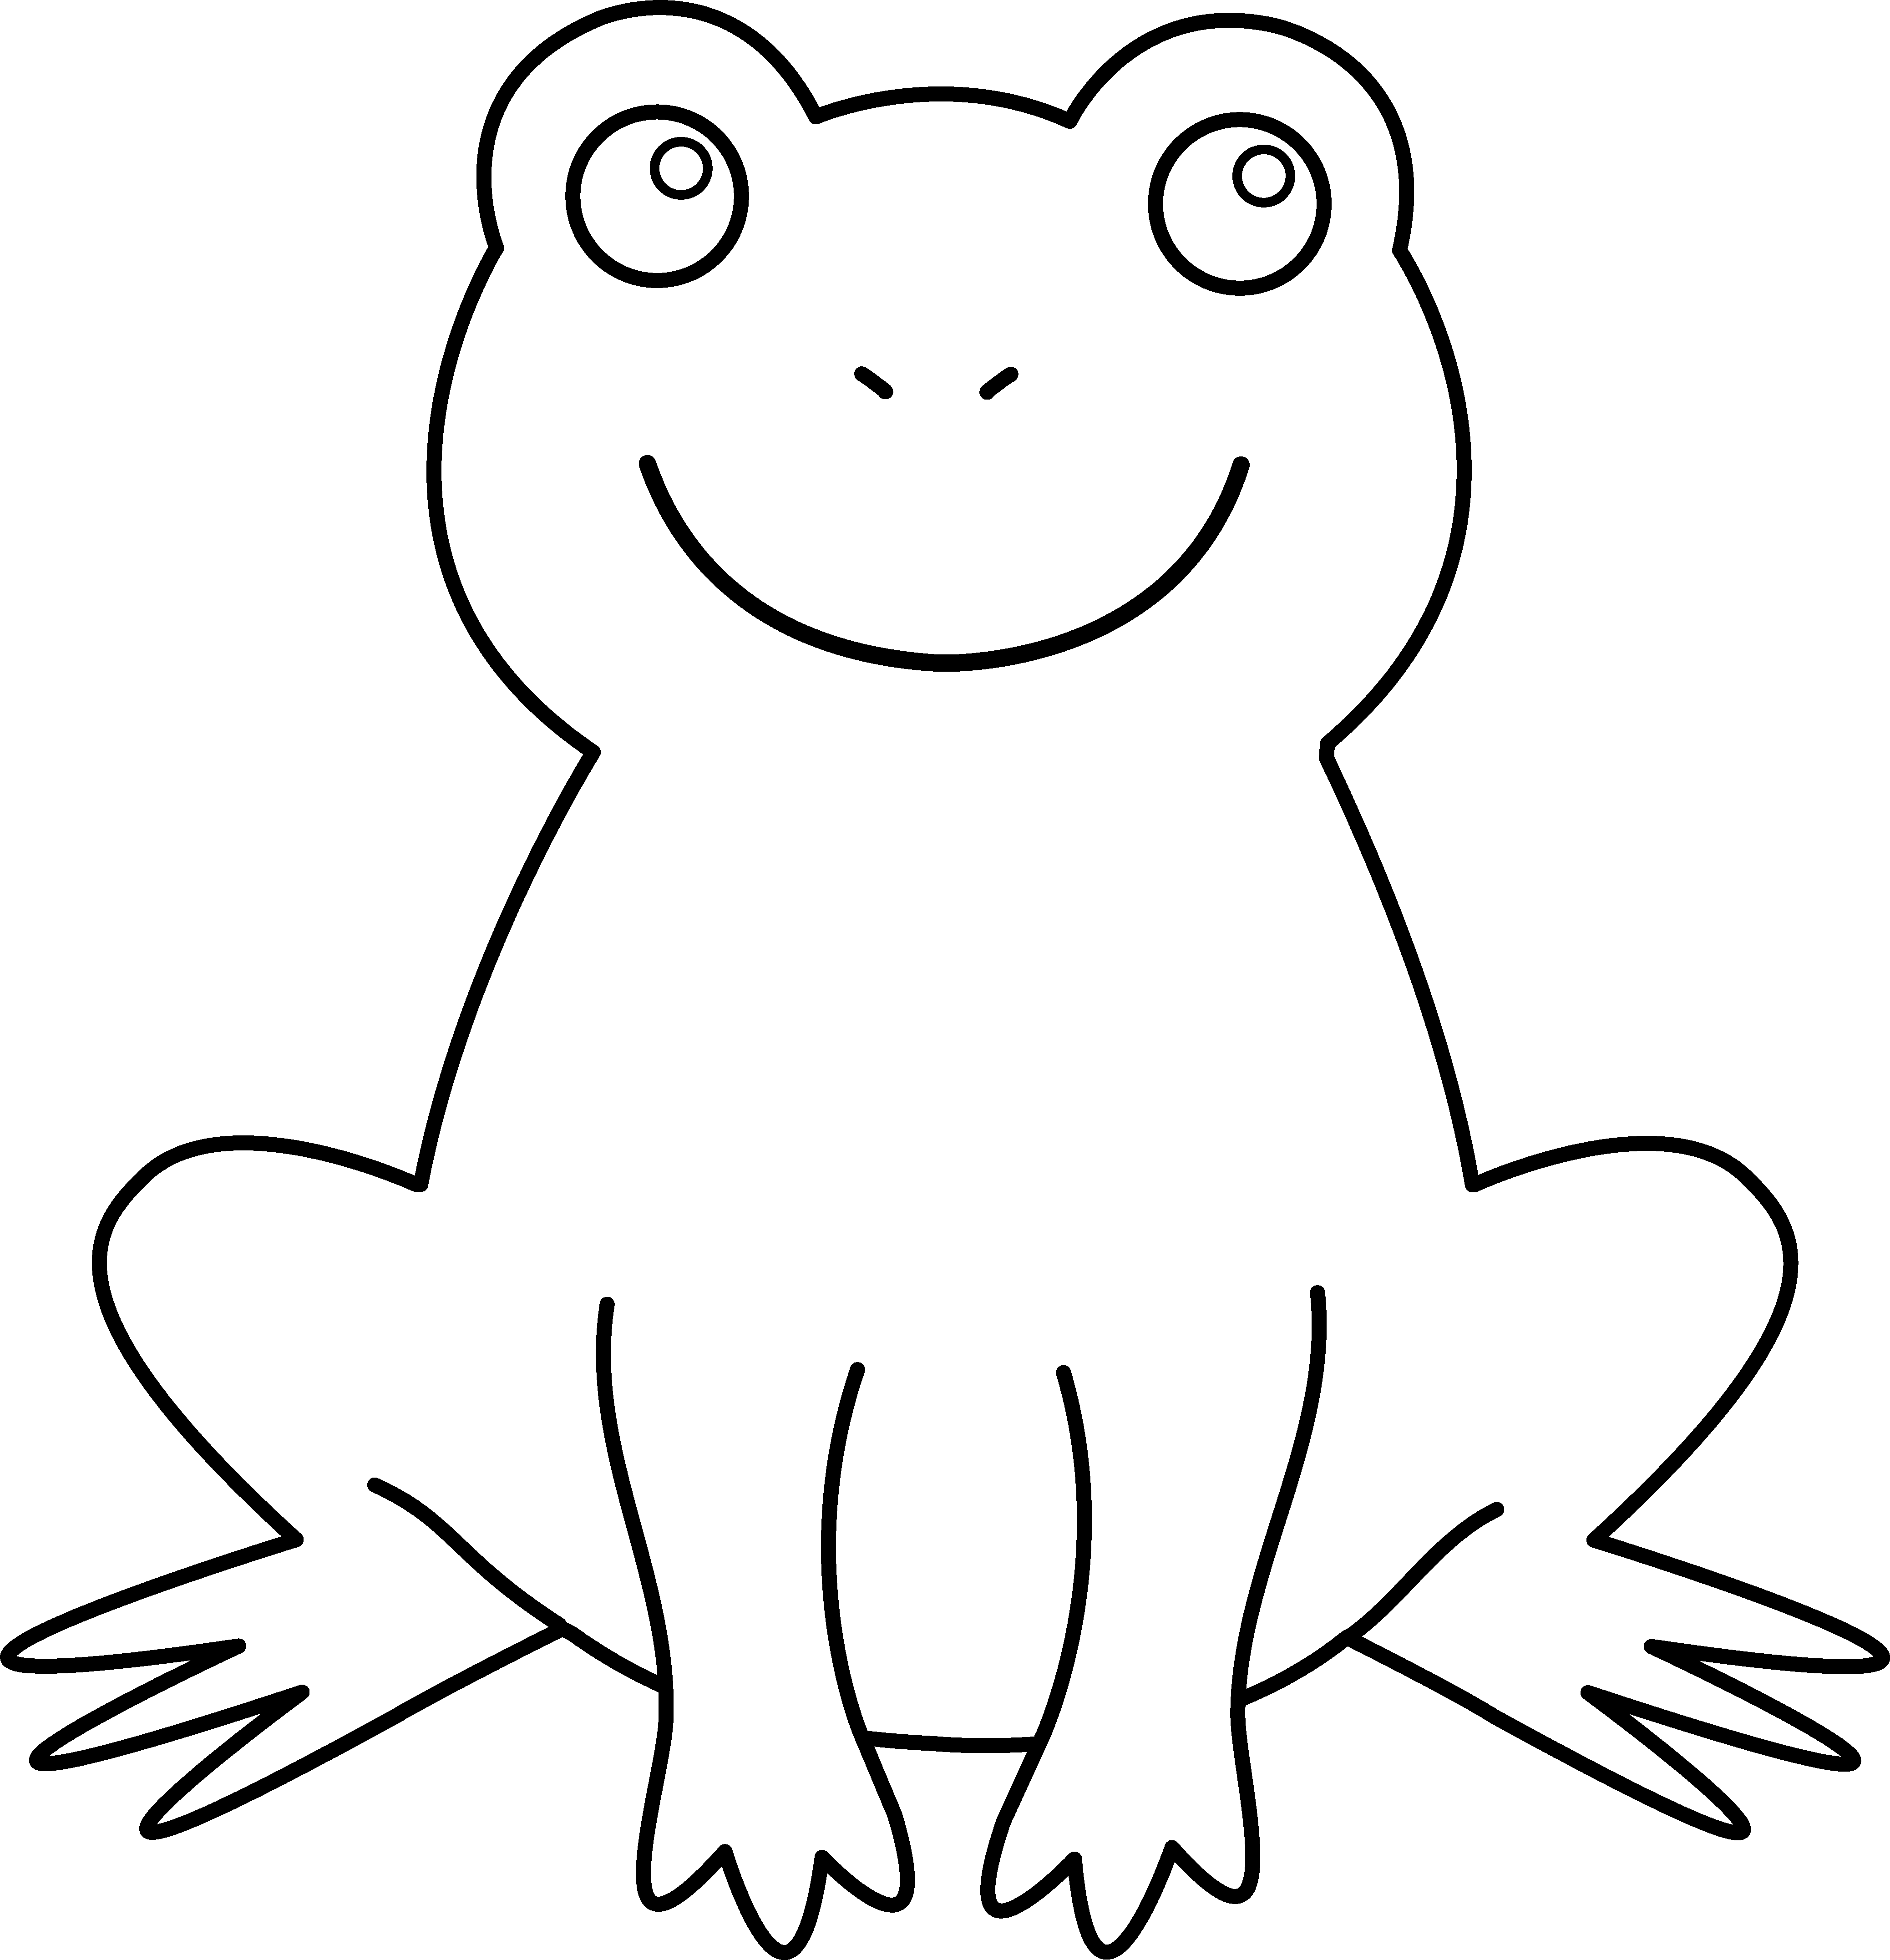 Tree frog Black and white Cli